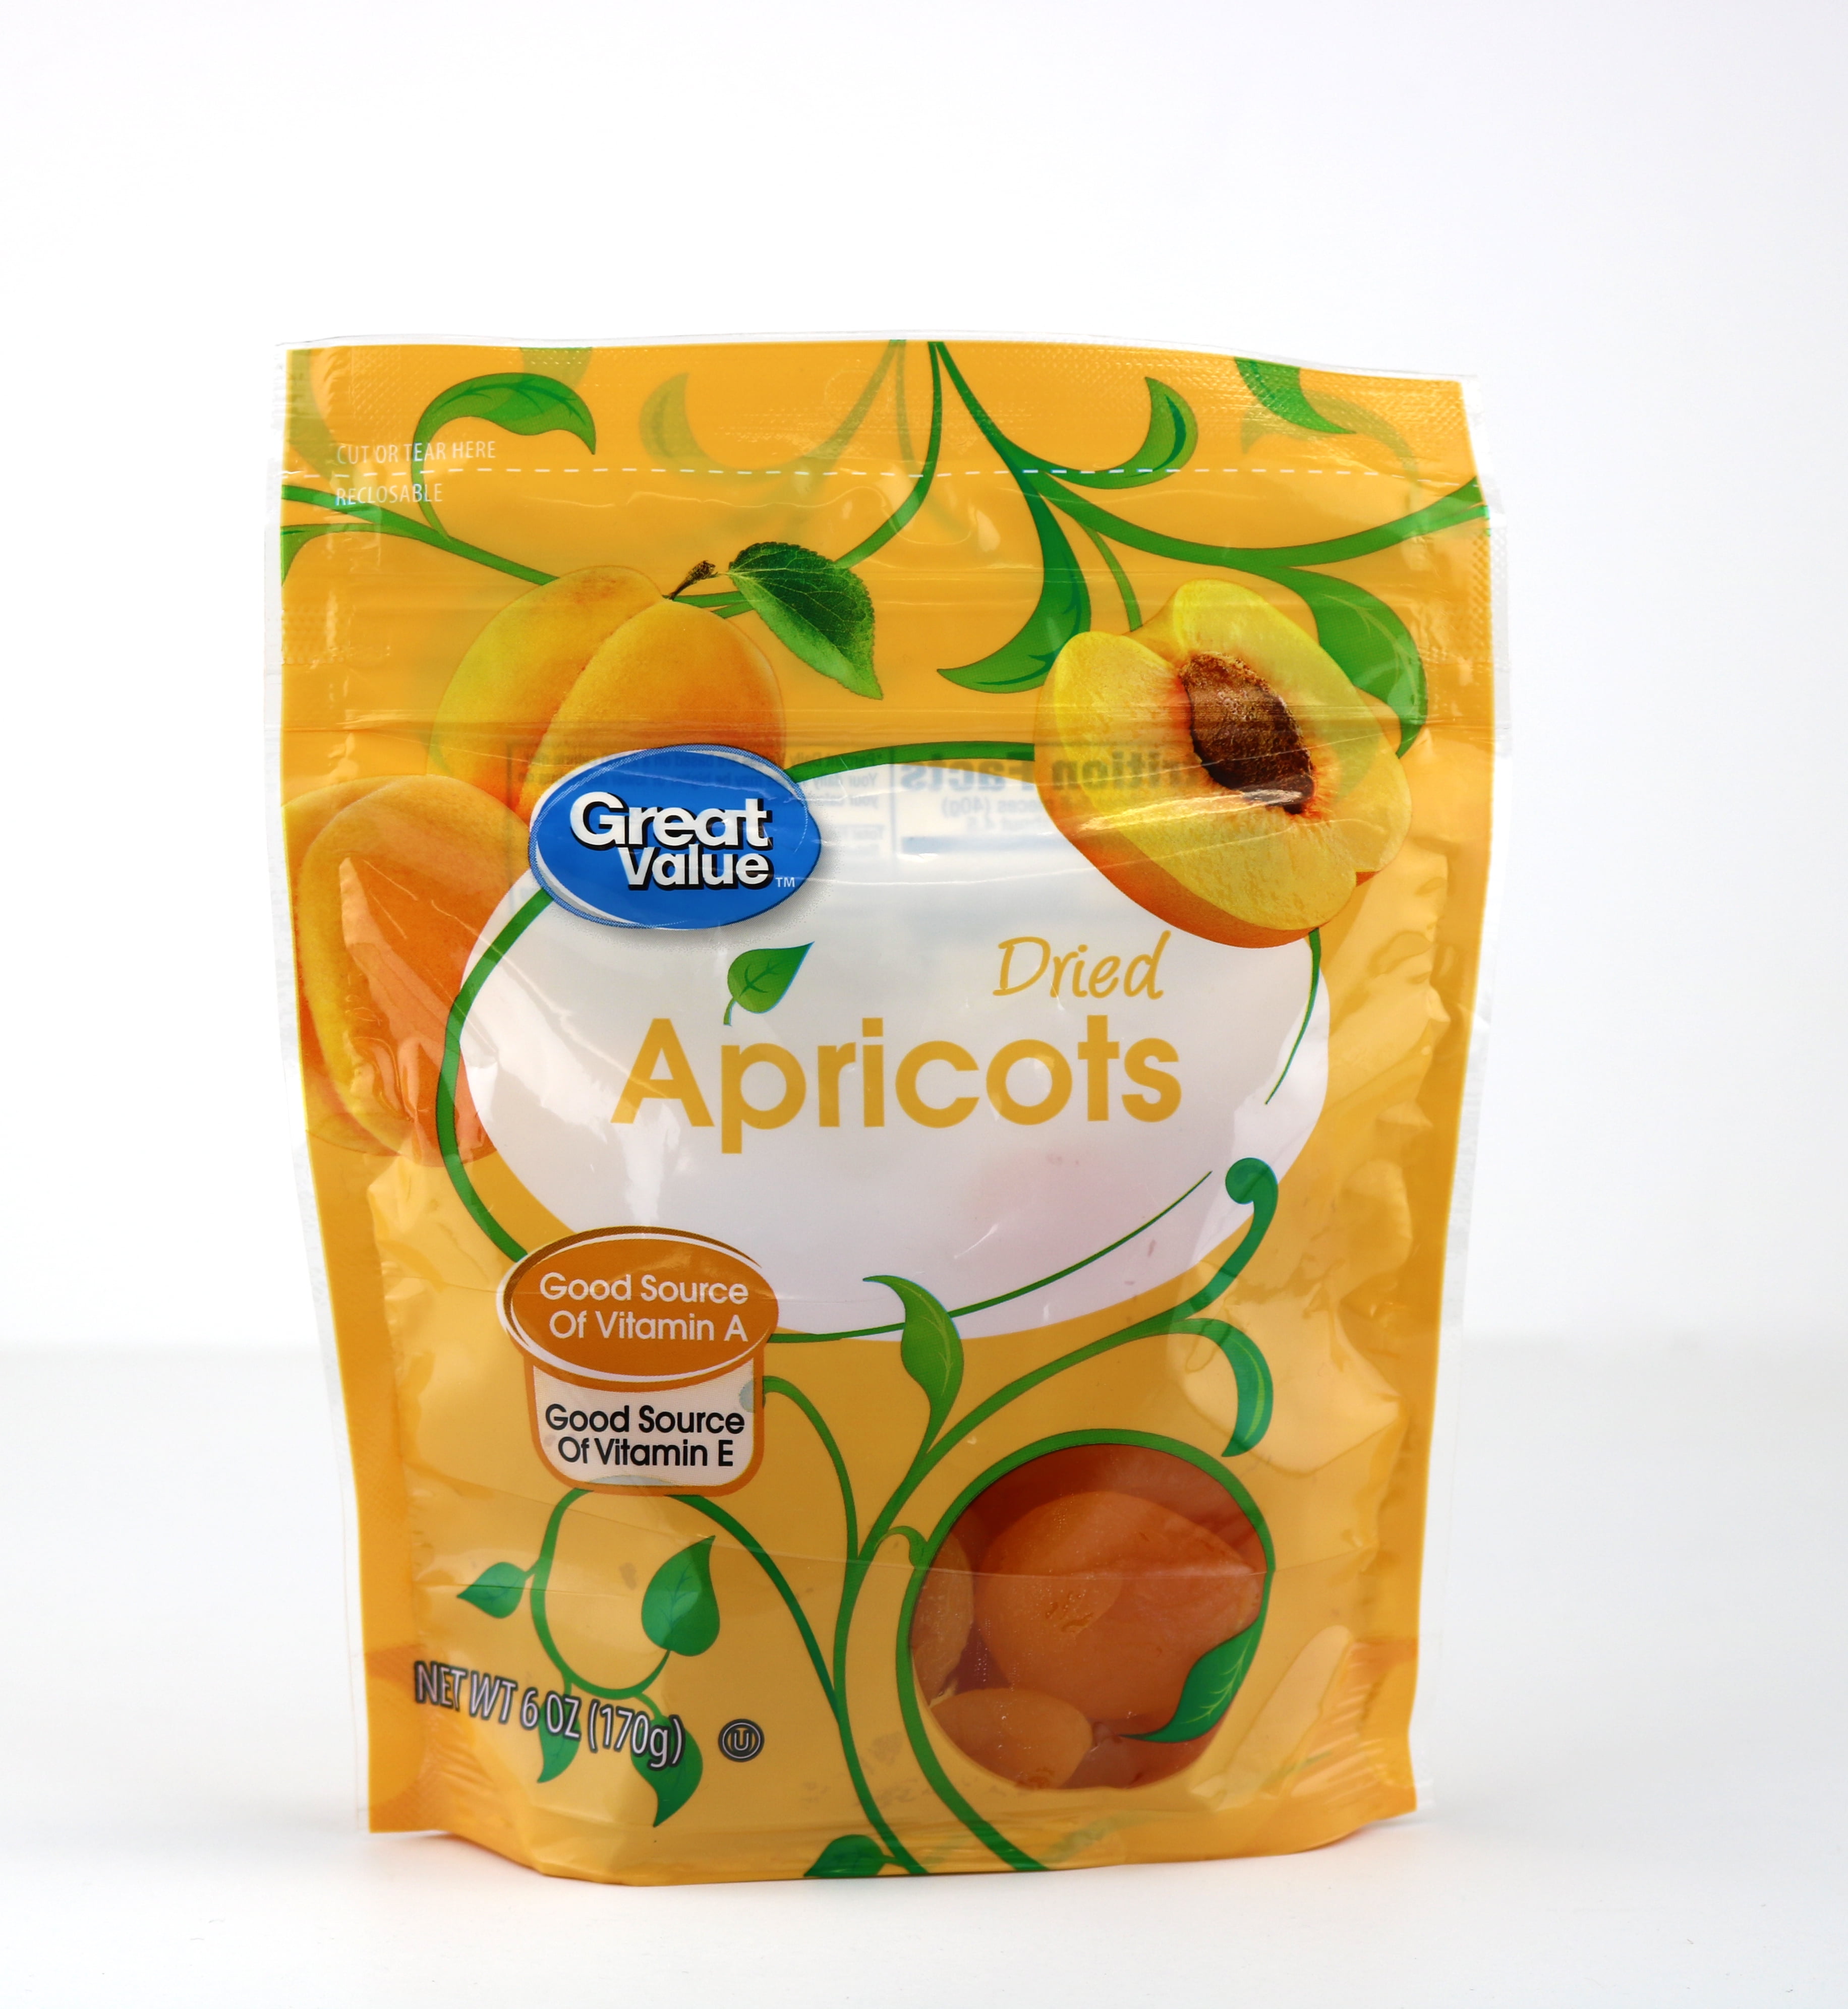 Great Value Dried Apricots 6 oz Walmart